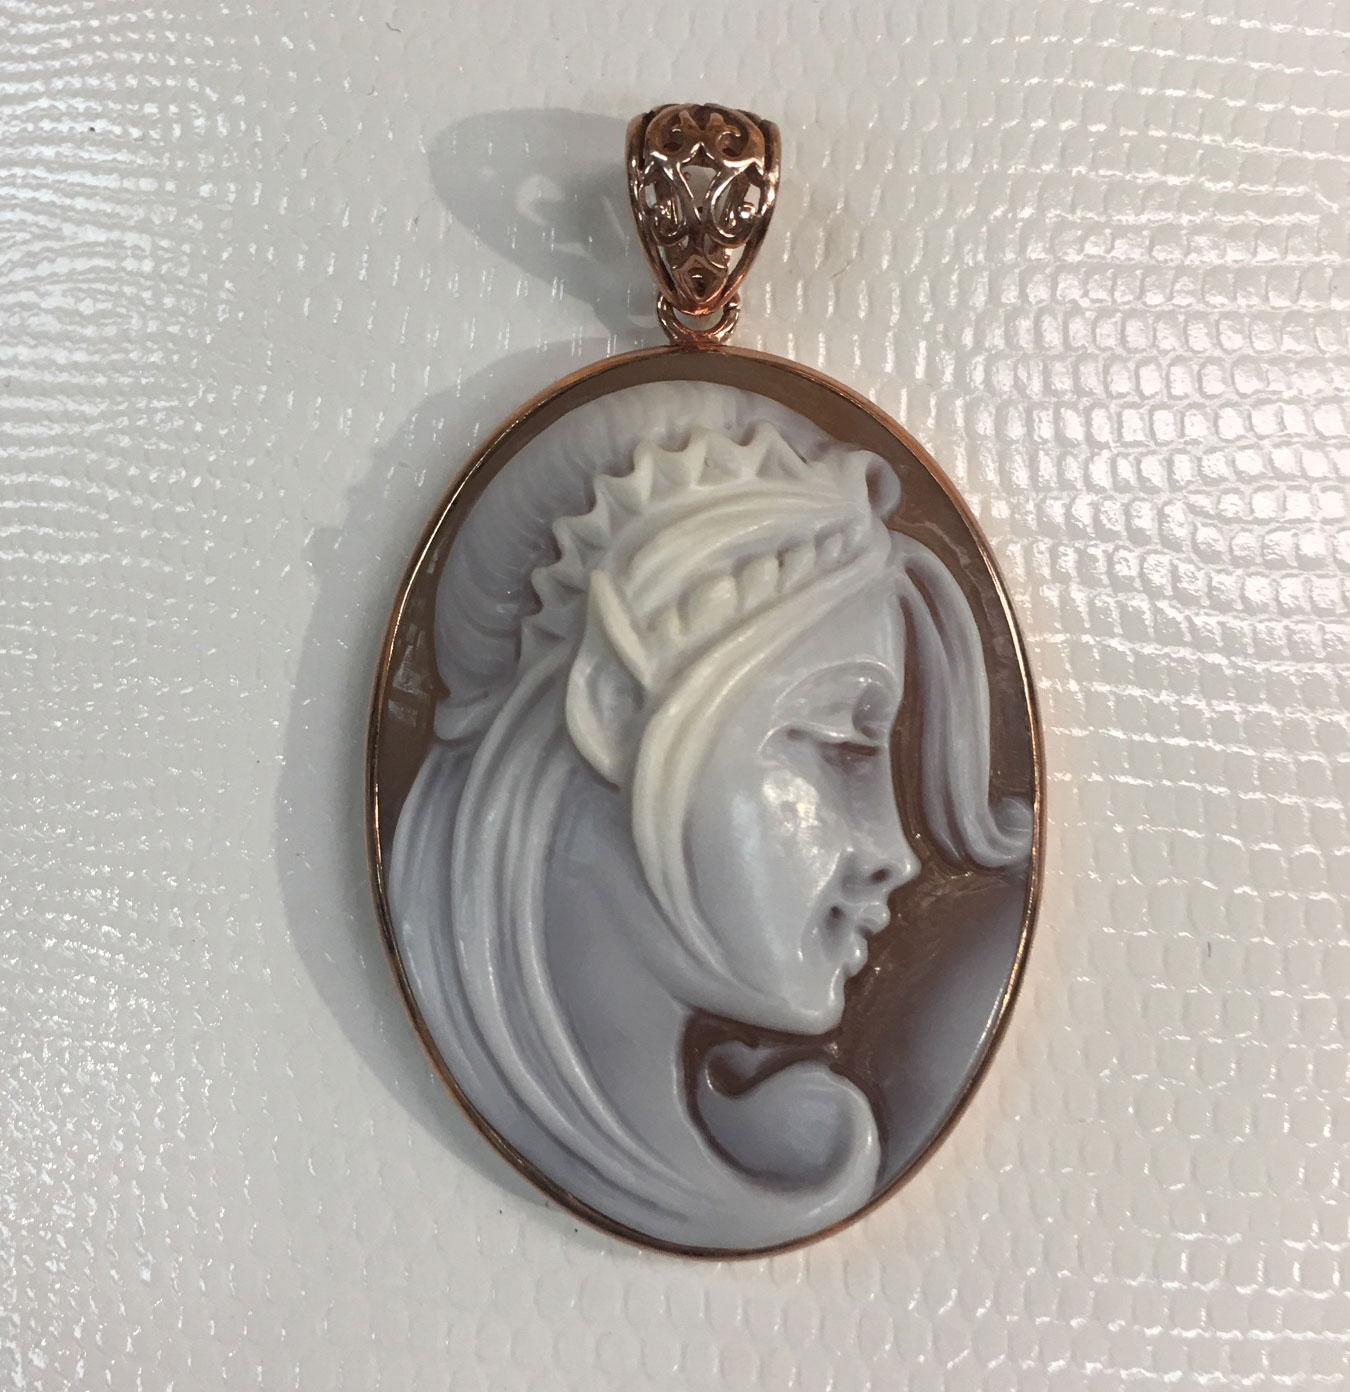 Hand carved shell Cameo Pendant depicting the Profile of a Classical Beauty with long flowing hair, set in a Rose Gold Sterling Silver mounting. Rendered with remarkable detail and warmth, so unusual to find! Measuring approx. 2 inches x 1.25